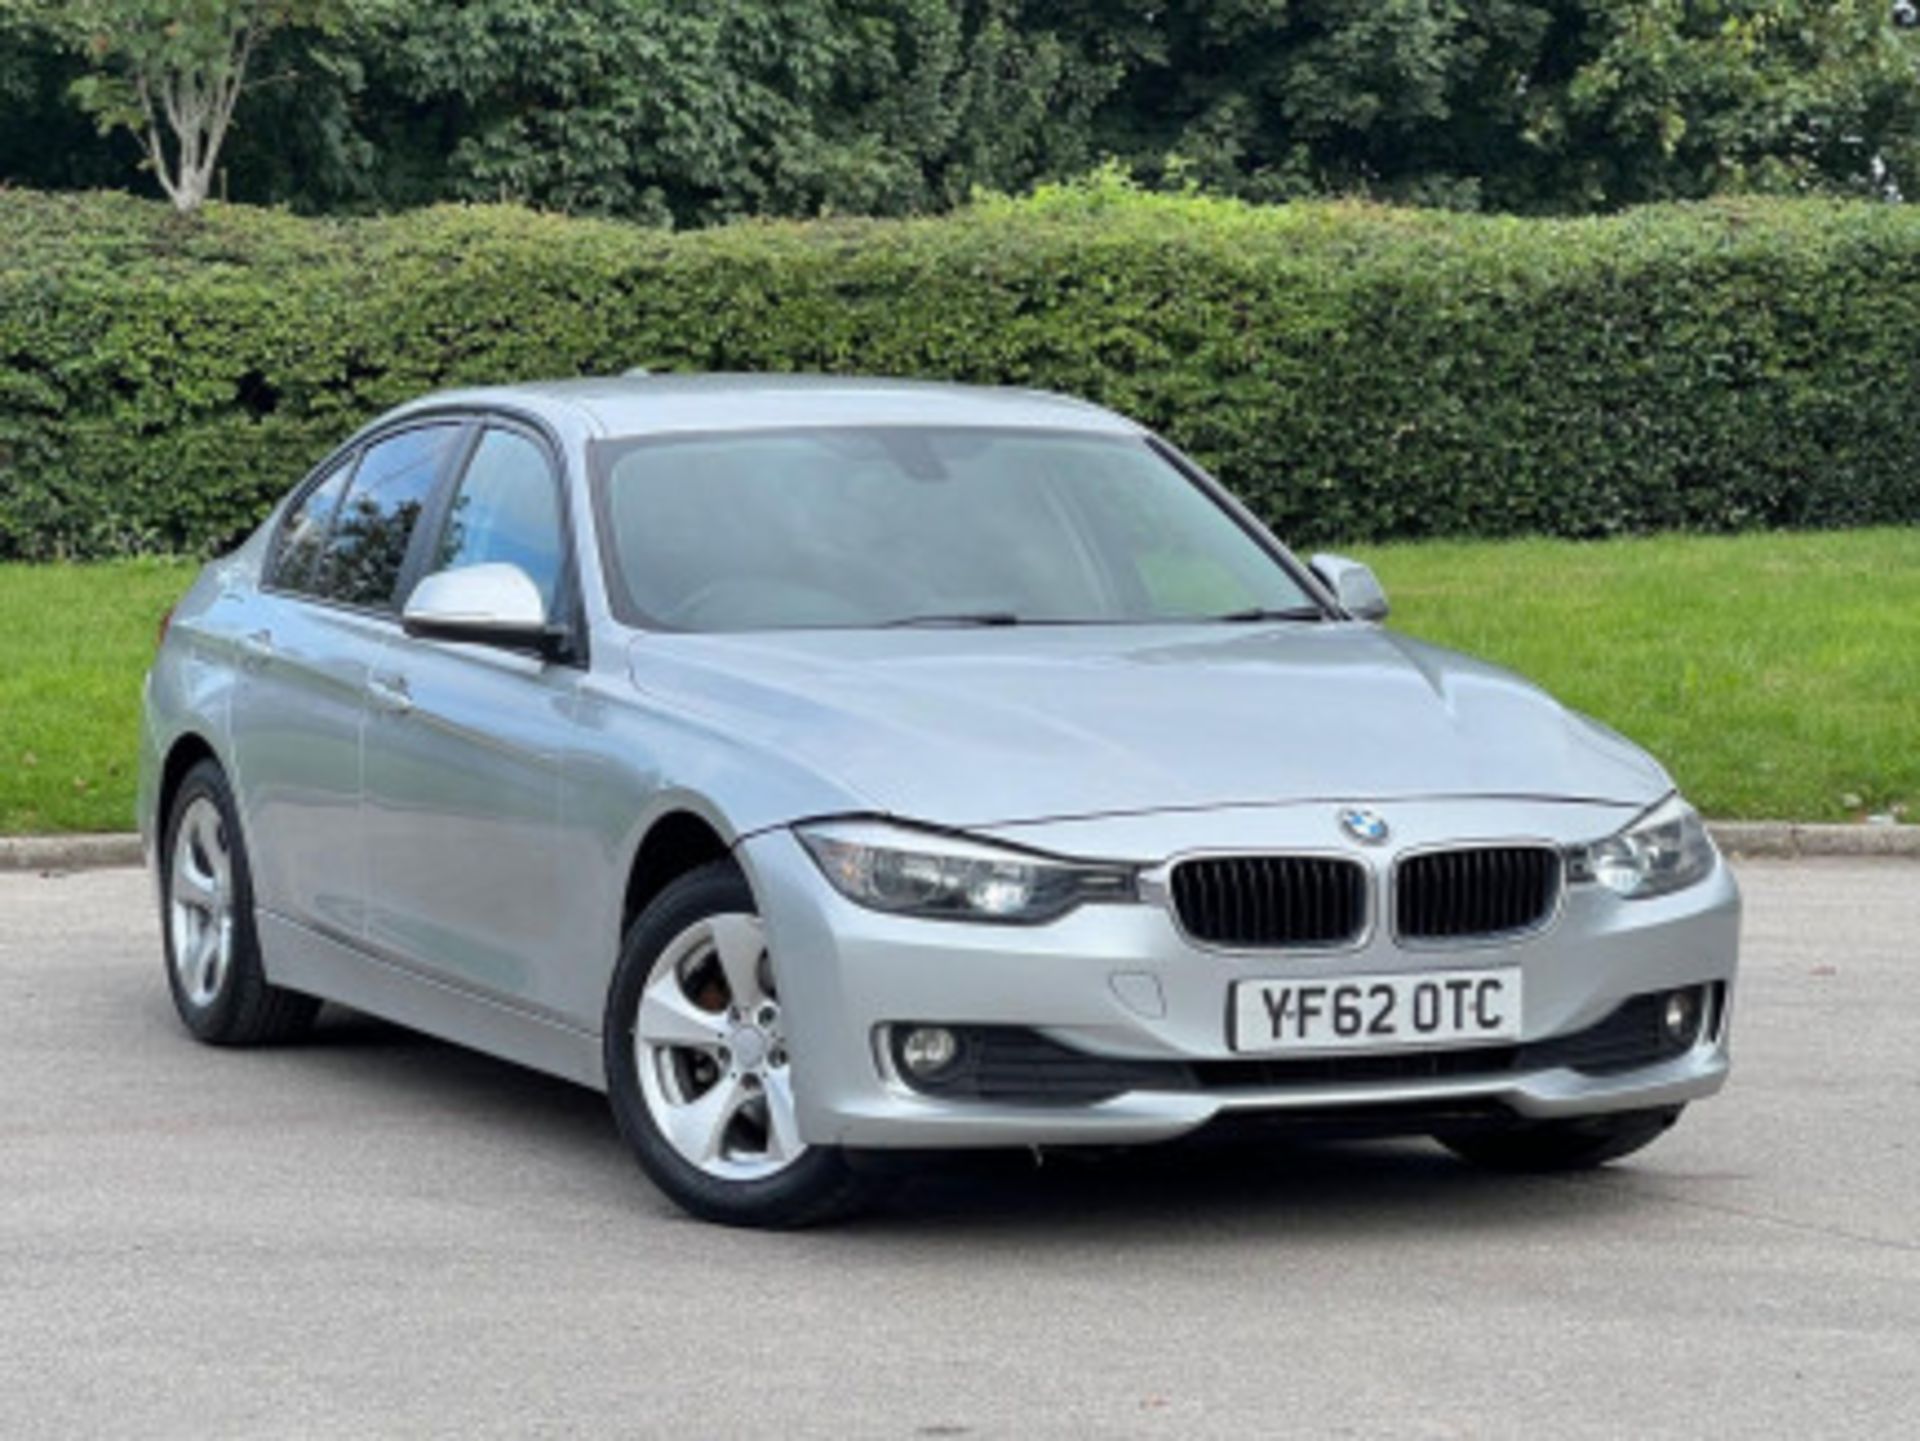 BMW 3 SERIES 2.0 DIESEL ED START STOP - A WELL-MAINTAINED GEM >>--NO VAT ON HAMMER--<< - Image 137 of 229